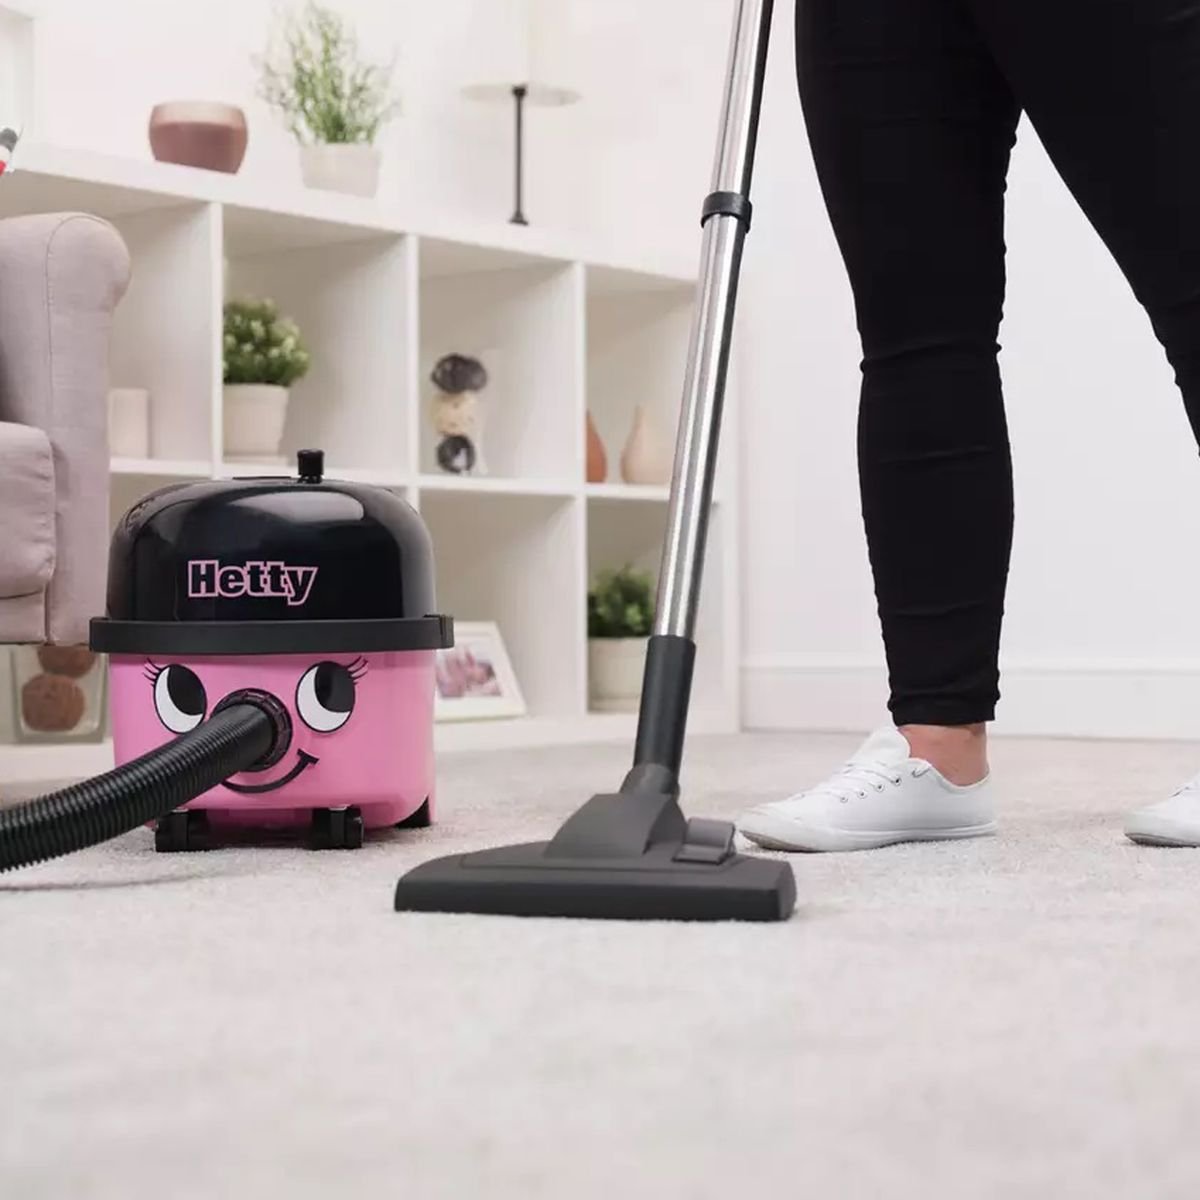 We tested the most famous pink vacuum cleaner on the market and we think Henry's got some competition...